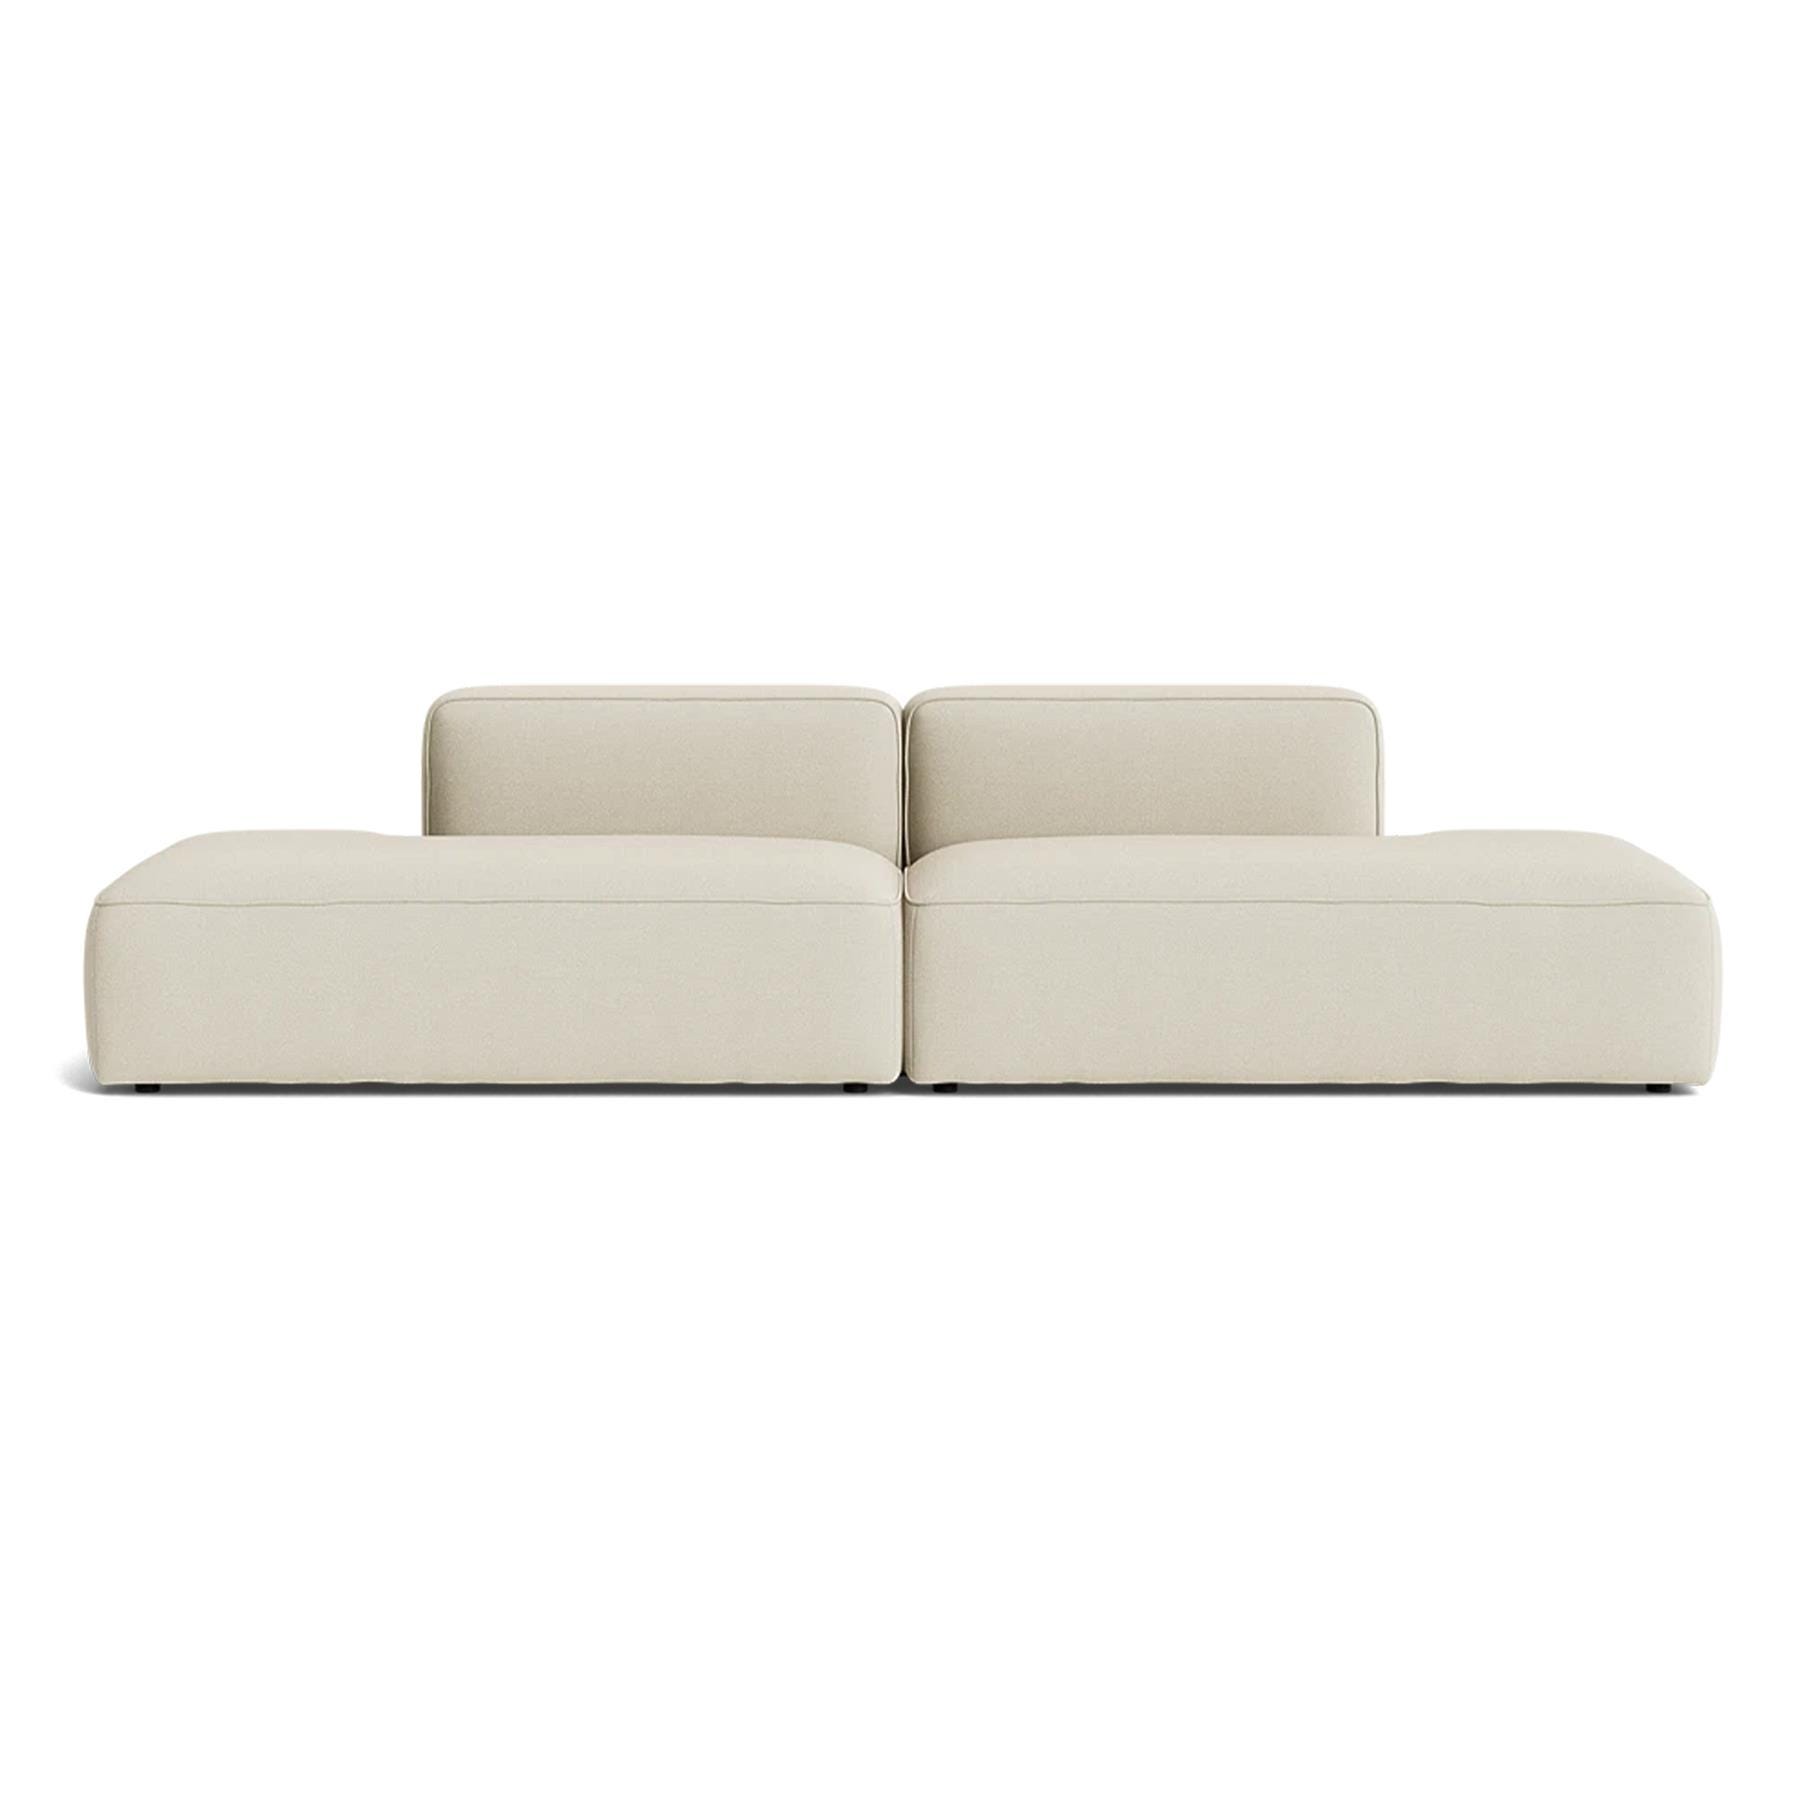 Make Nordic Basecamp Xl Sofa With 2 Open Ends Vidar 146 Cream Designer Furniture From Holloways Of Ludlow